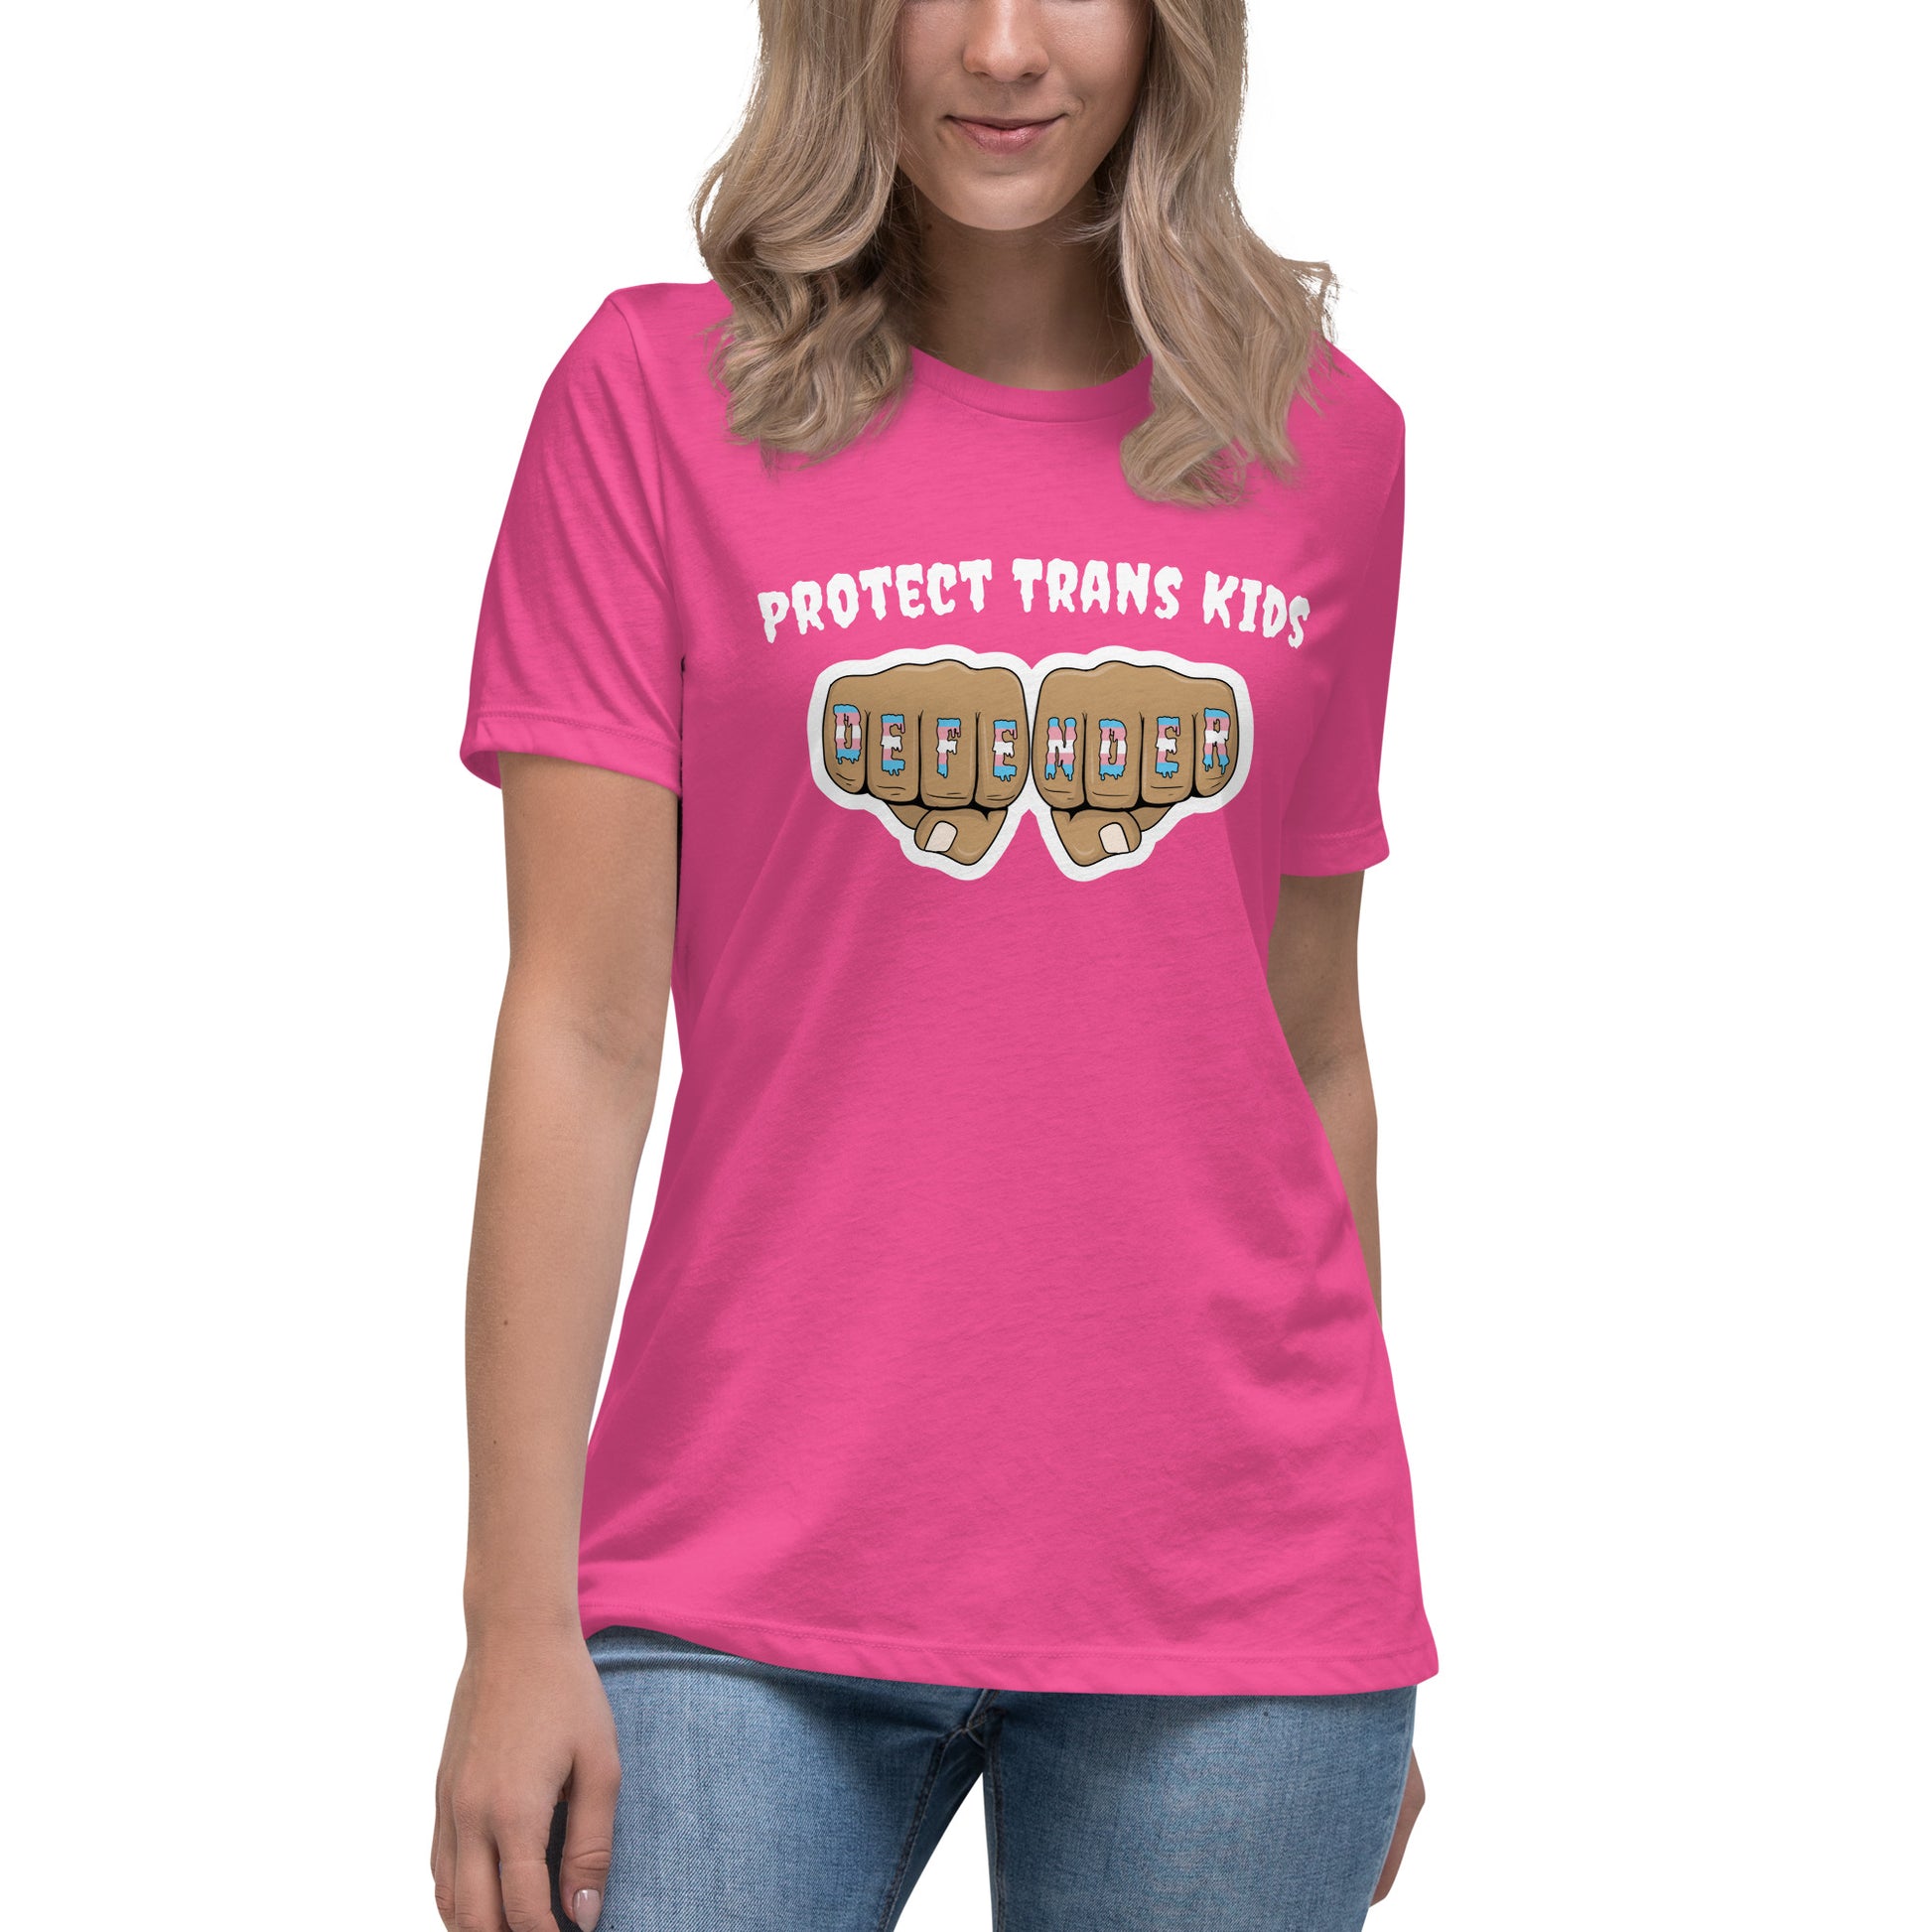 A standard, round neck, short sleeve t-shirt in pink with the text "protect trans kids" in white lettering above an image of fists with "defender" written across the knuckles in blue,pink, and white. The shirt is on a white, straight sized model standing against a white background.